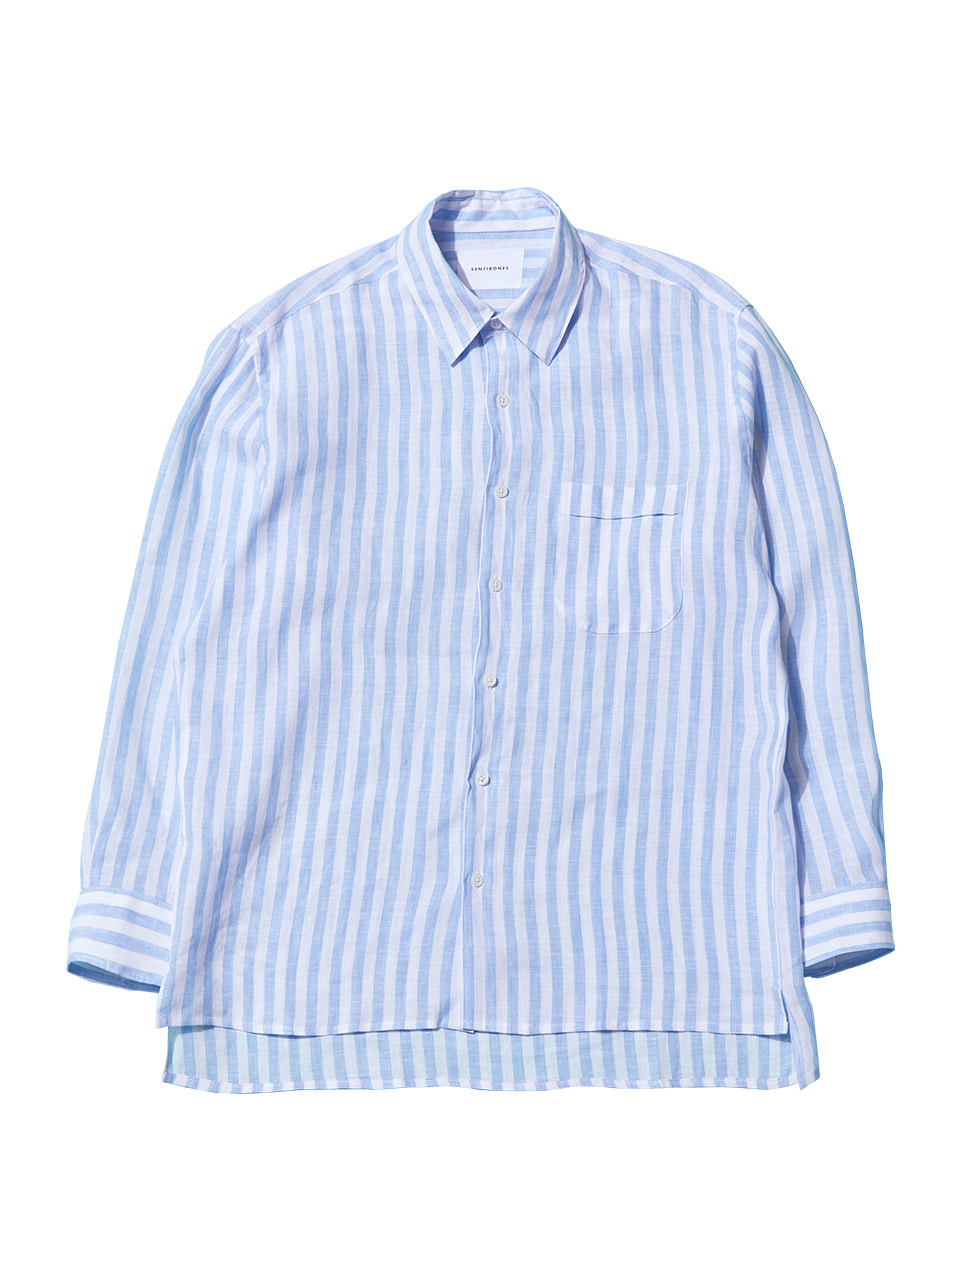 GARMENT- WASHED LINEN SHIRTS (SEMI OVER FIT) - BLUE STRIPE